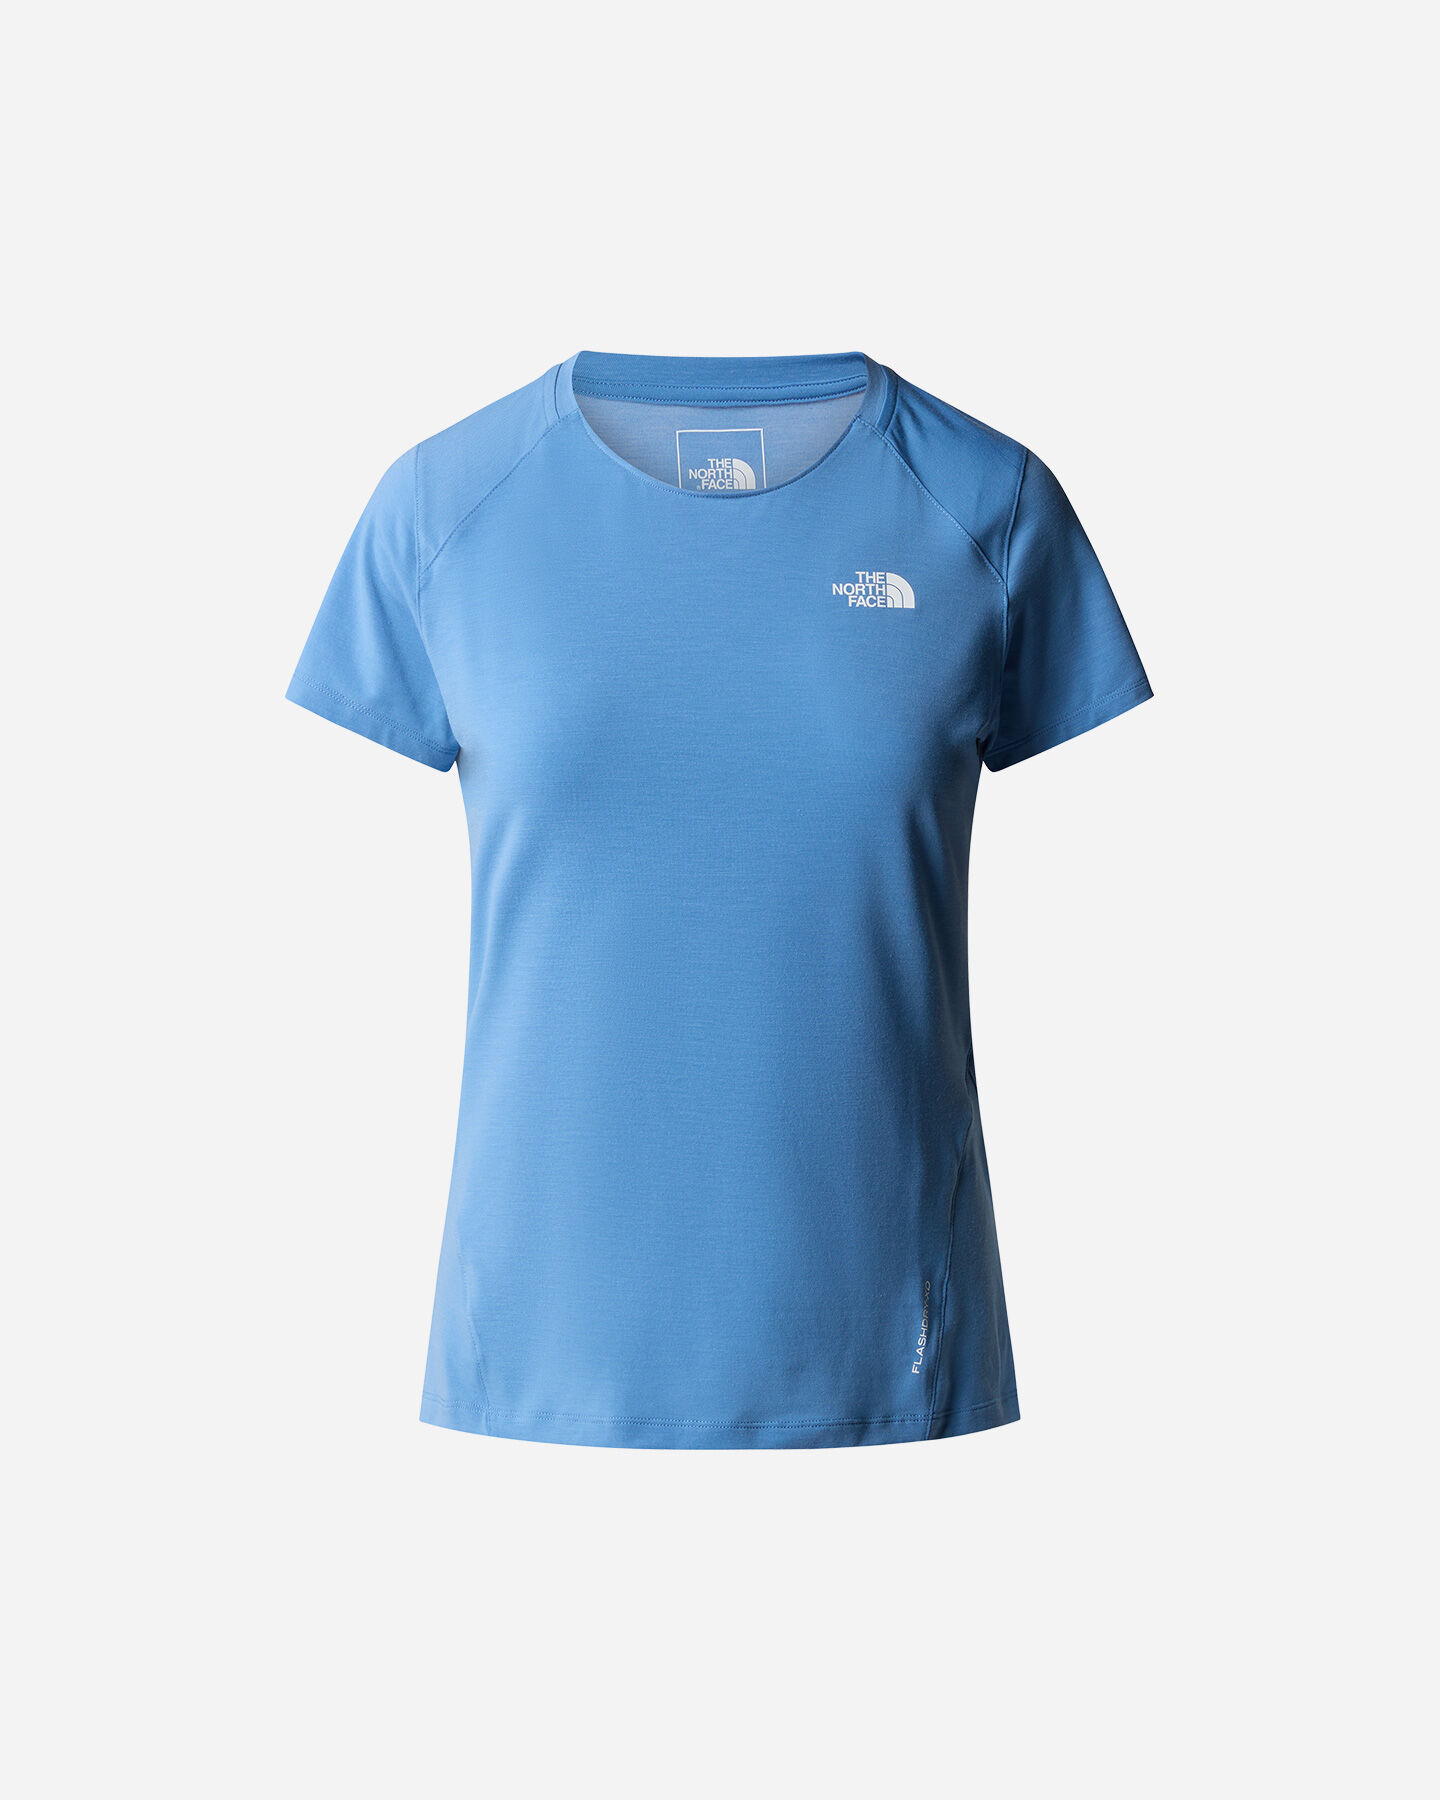  T-Shirt THE NORTH FACE LIGHTNING ALPINE W S5650898|POD|XS scatto 0